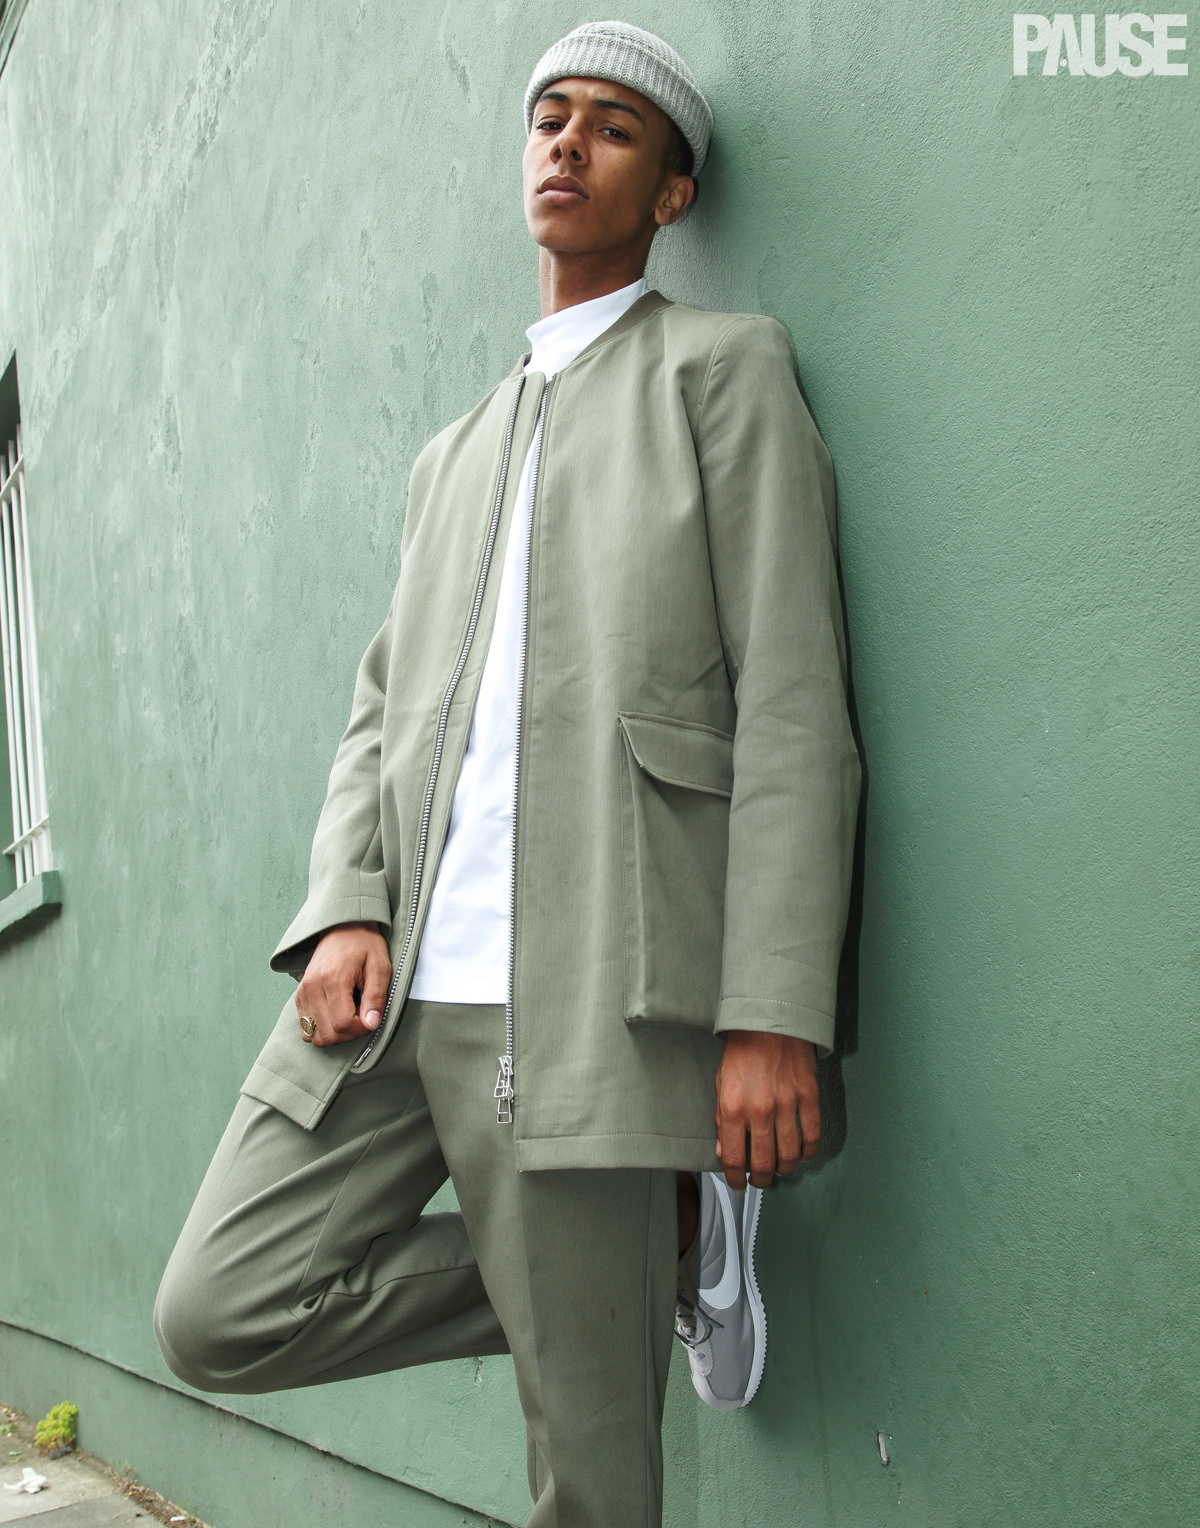 PAUSE Editorial: L’automne – PAUSE Online | Men's Fashion, Street Style ...